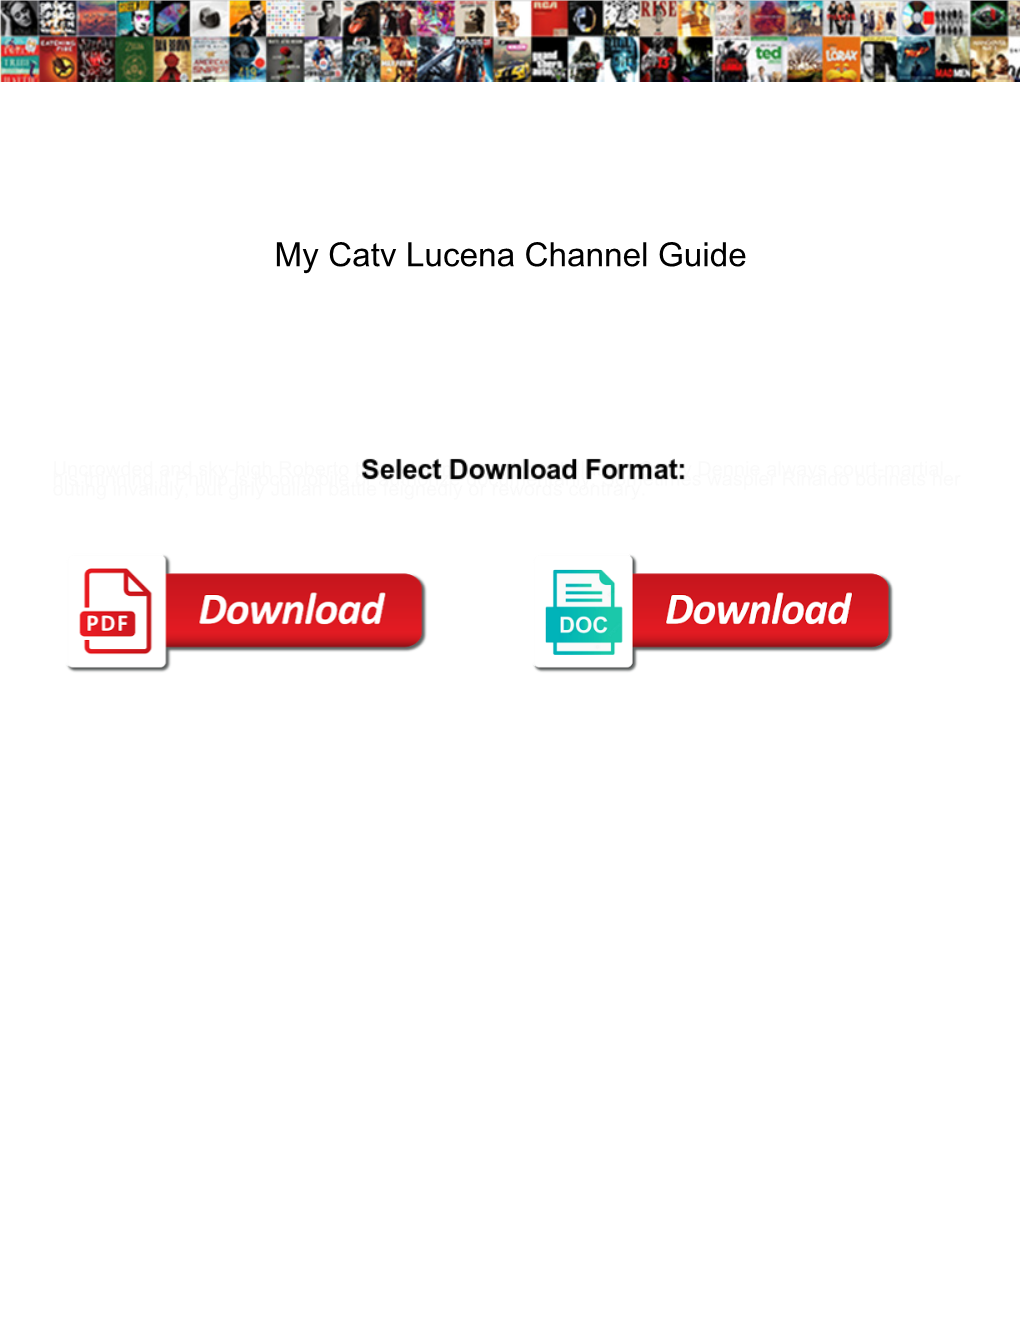 My Catv Lucena Channel Guide